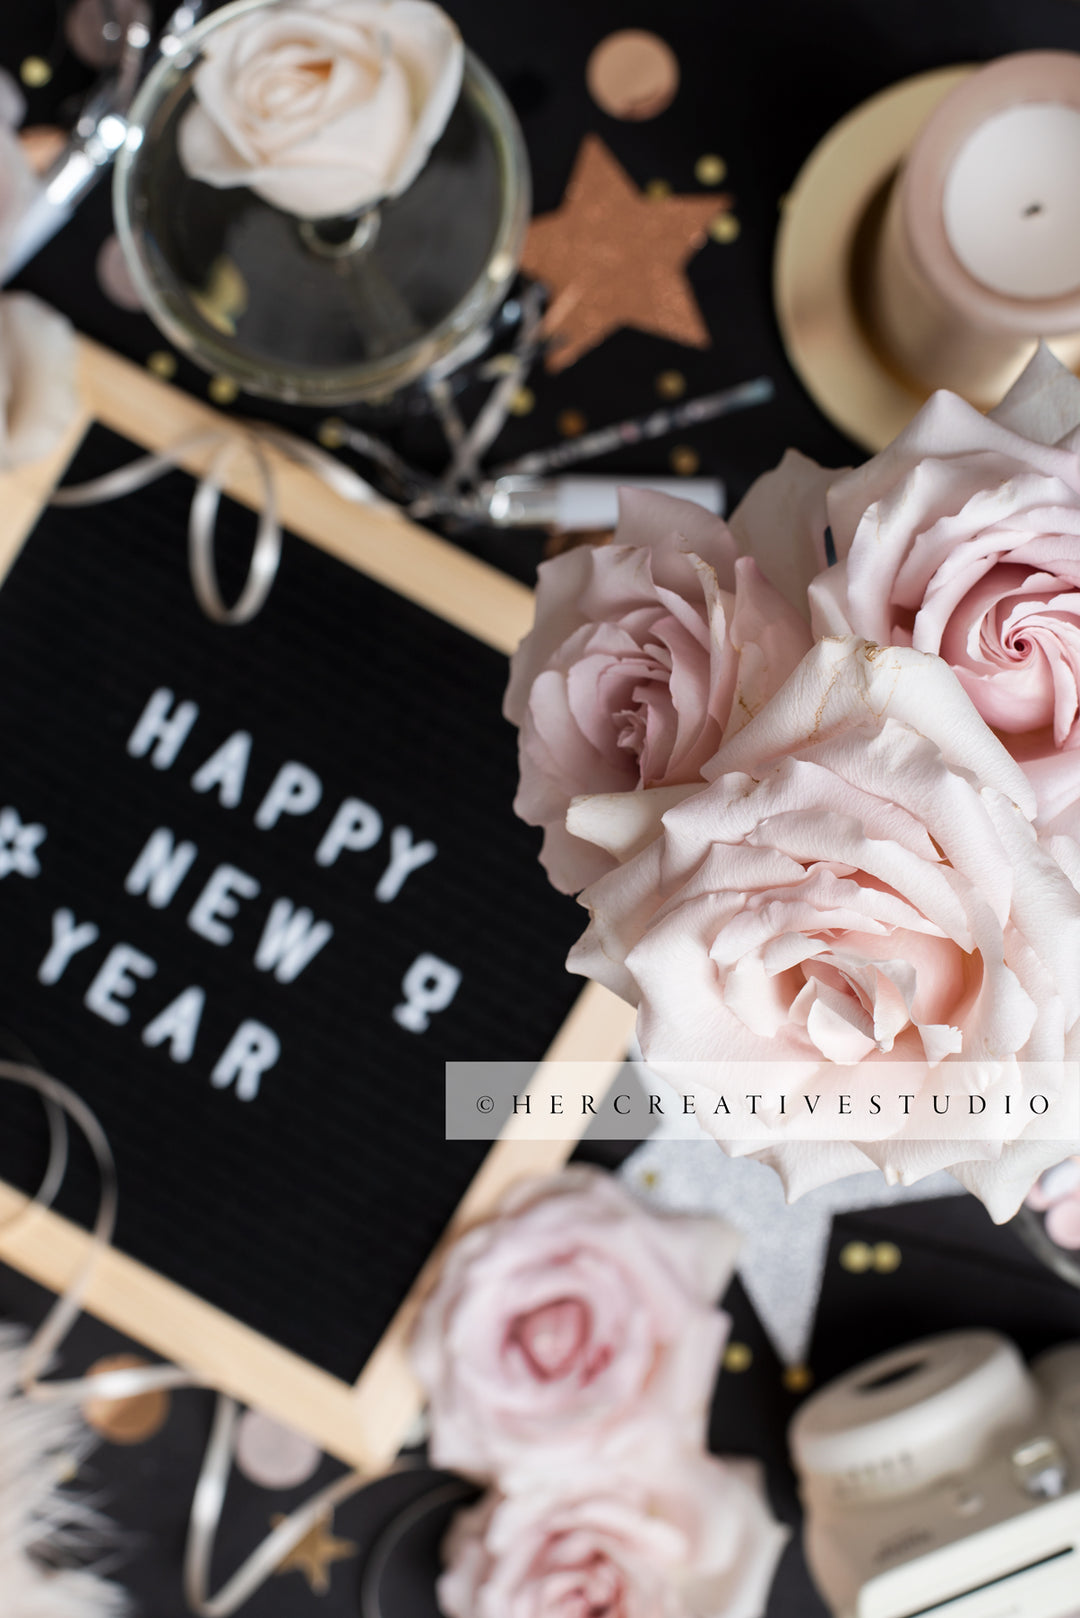 Letterboard, Candle & Roses, New Years's Eve Stock Image